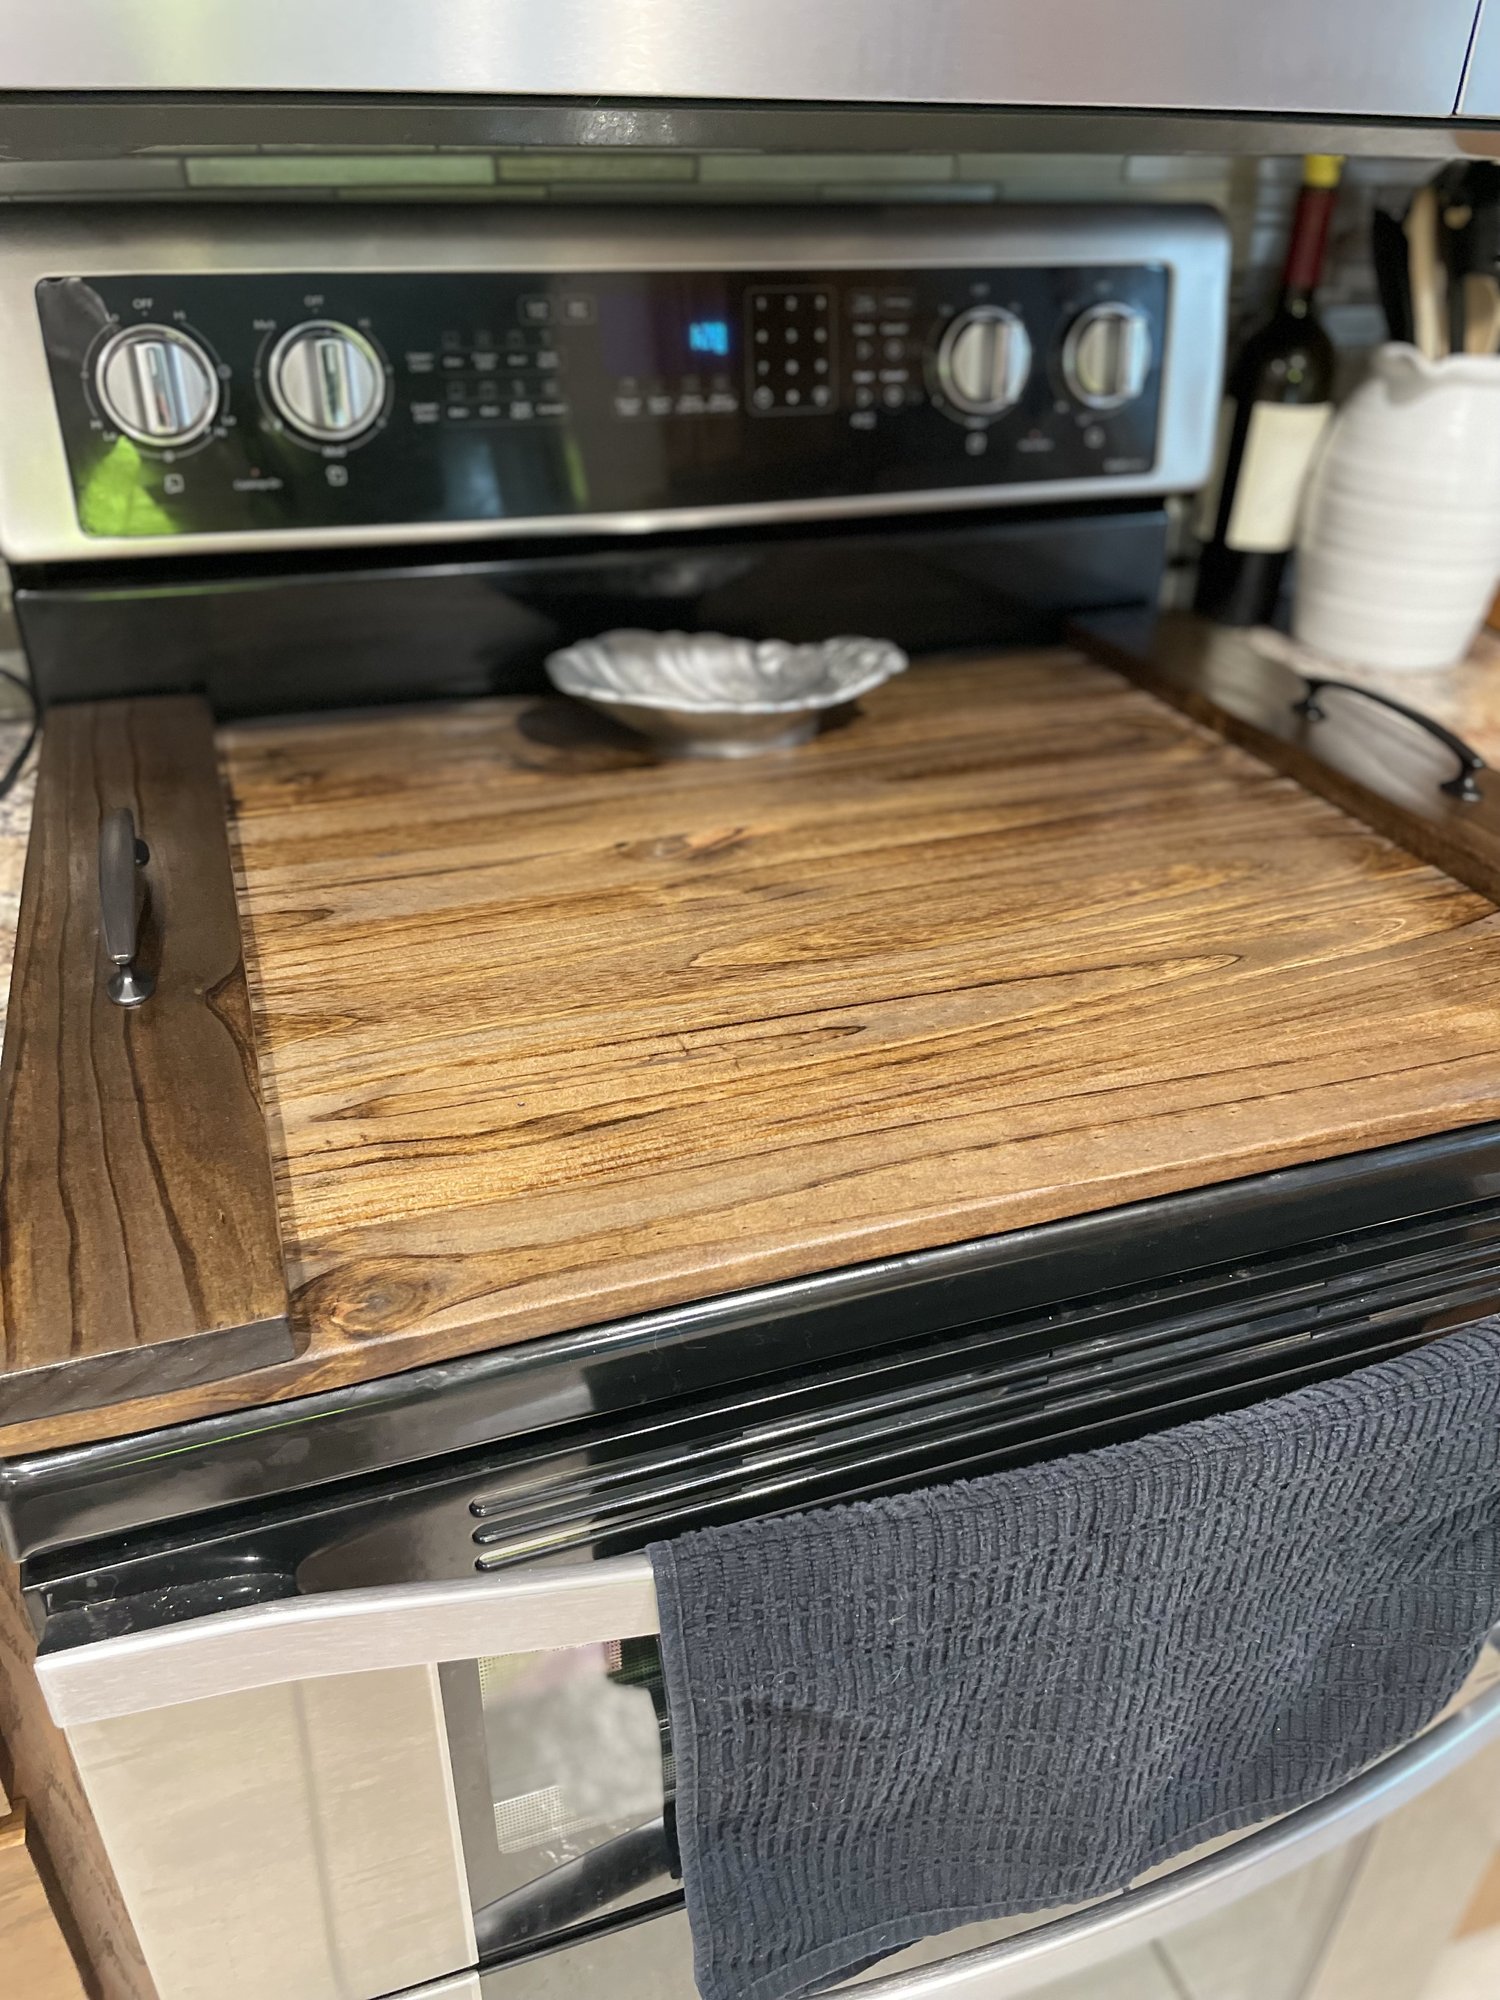 Noodle Board for glass top stove tops – Sawyer Custom Crafts